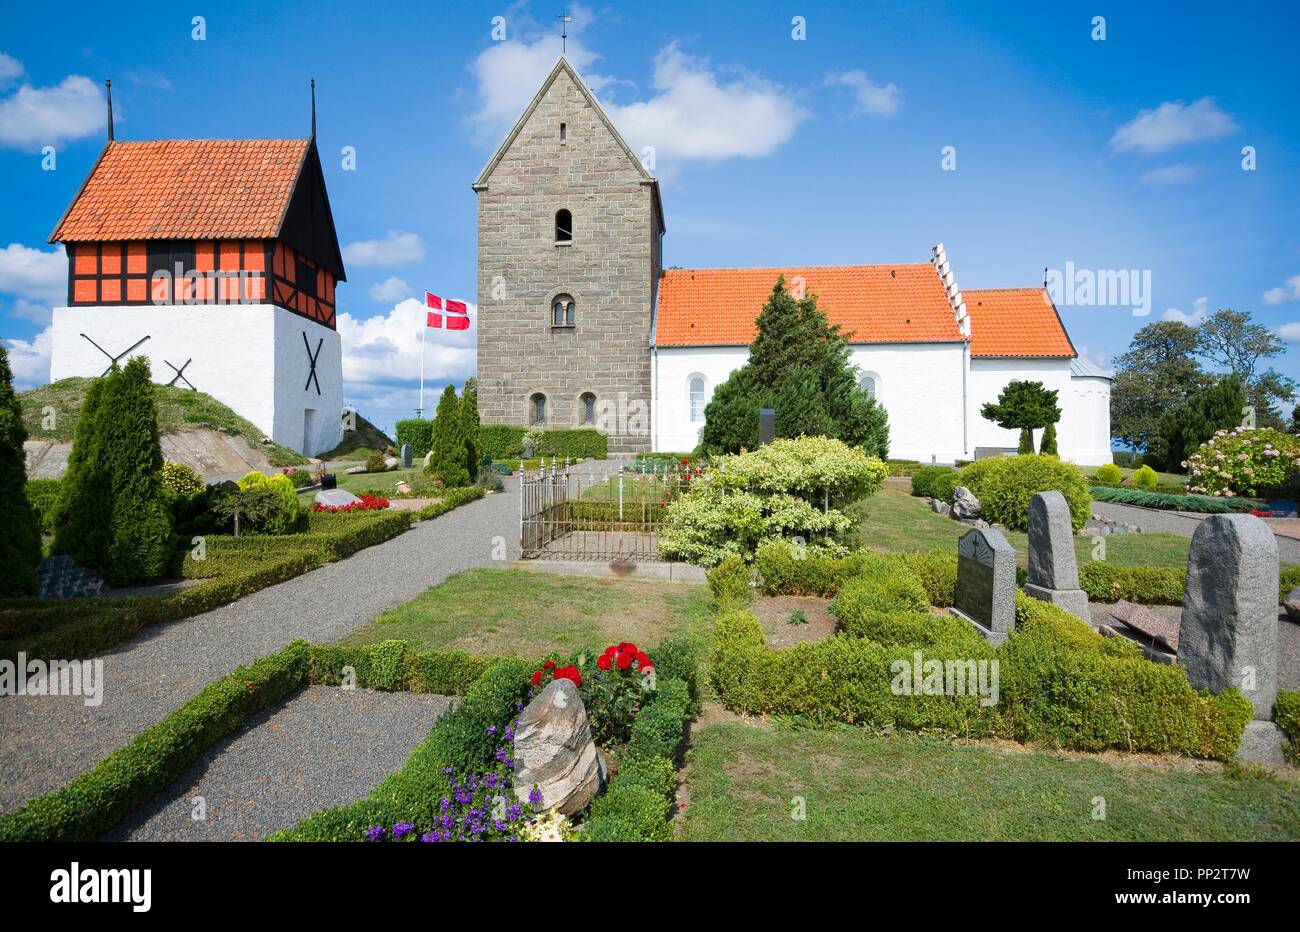 RUTSKER, DENMARK - AUGUST 25, 2018: View of the Church of Ruth from the graveyard. Built about 1200, is the highest point for a church anywhere in Den Stock Photo